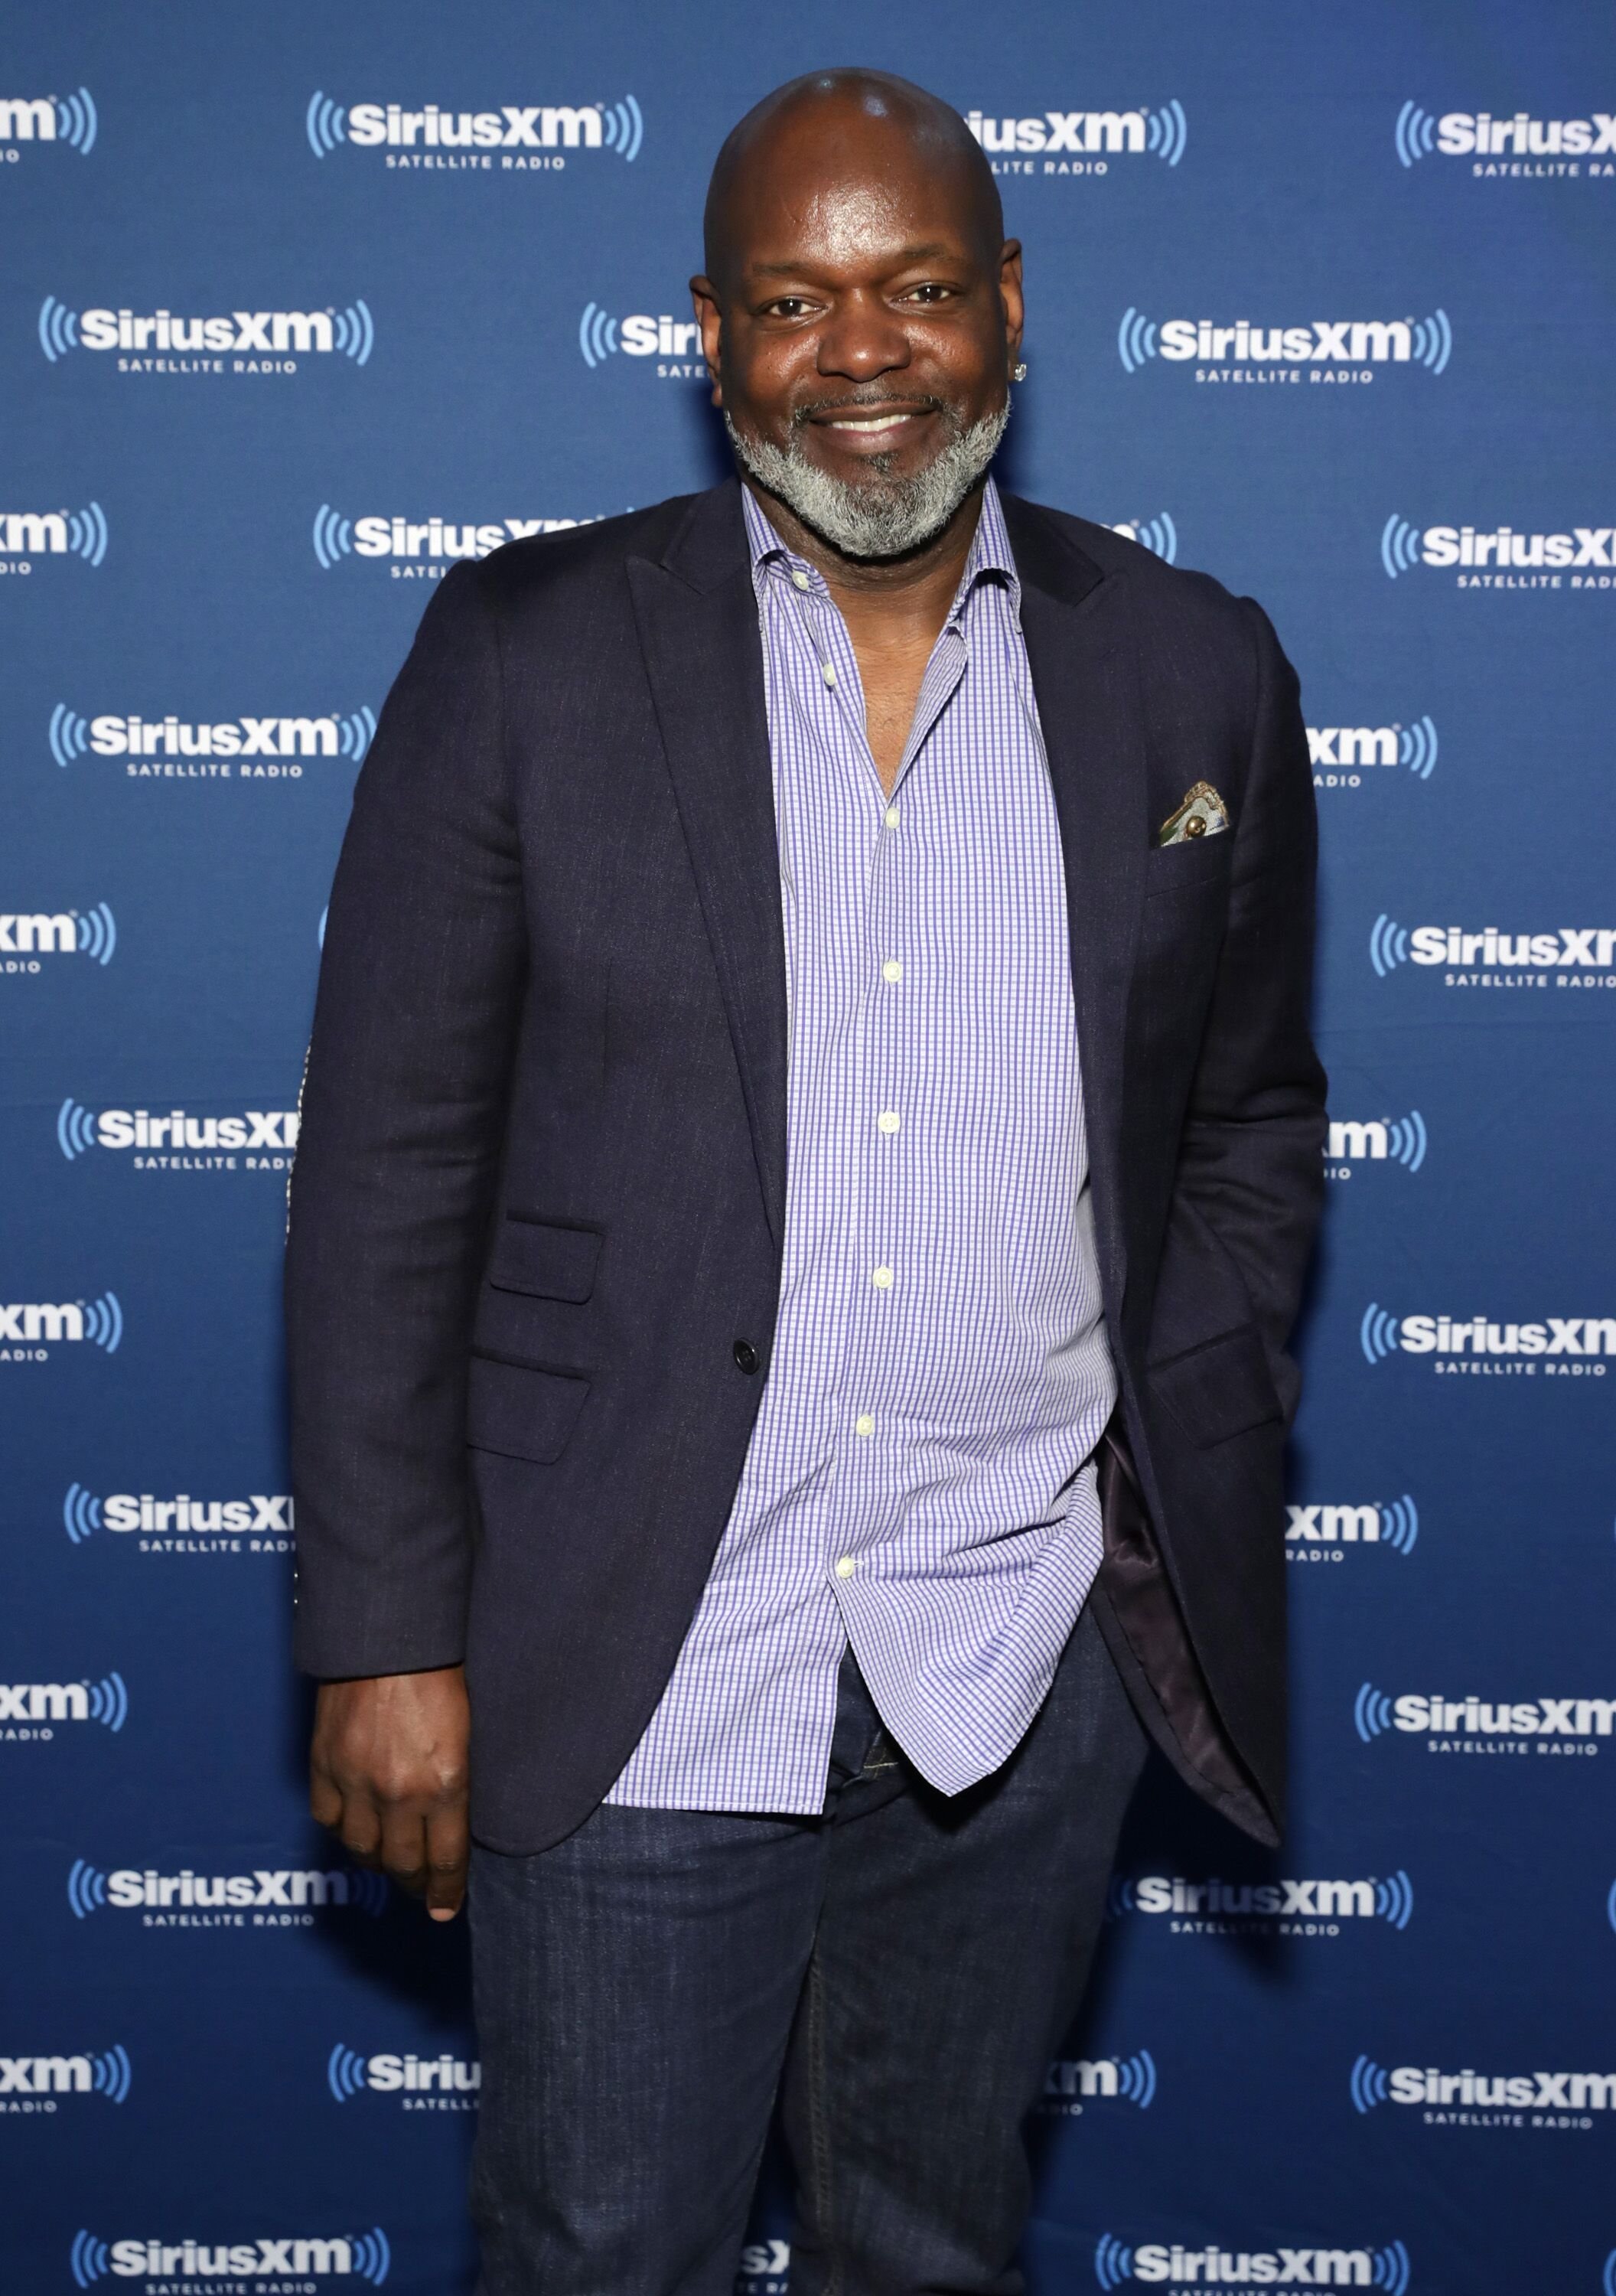  Former NFL player Emmitt Smith visits the SiriusXM set at Super Bowl 51 Radio Row at the George R. Brown Convention Center on February 2, 2017 | Photo: Getty Images